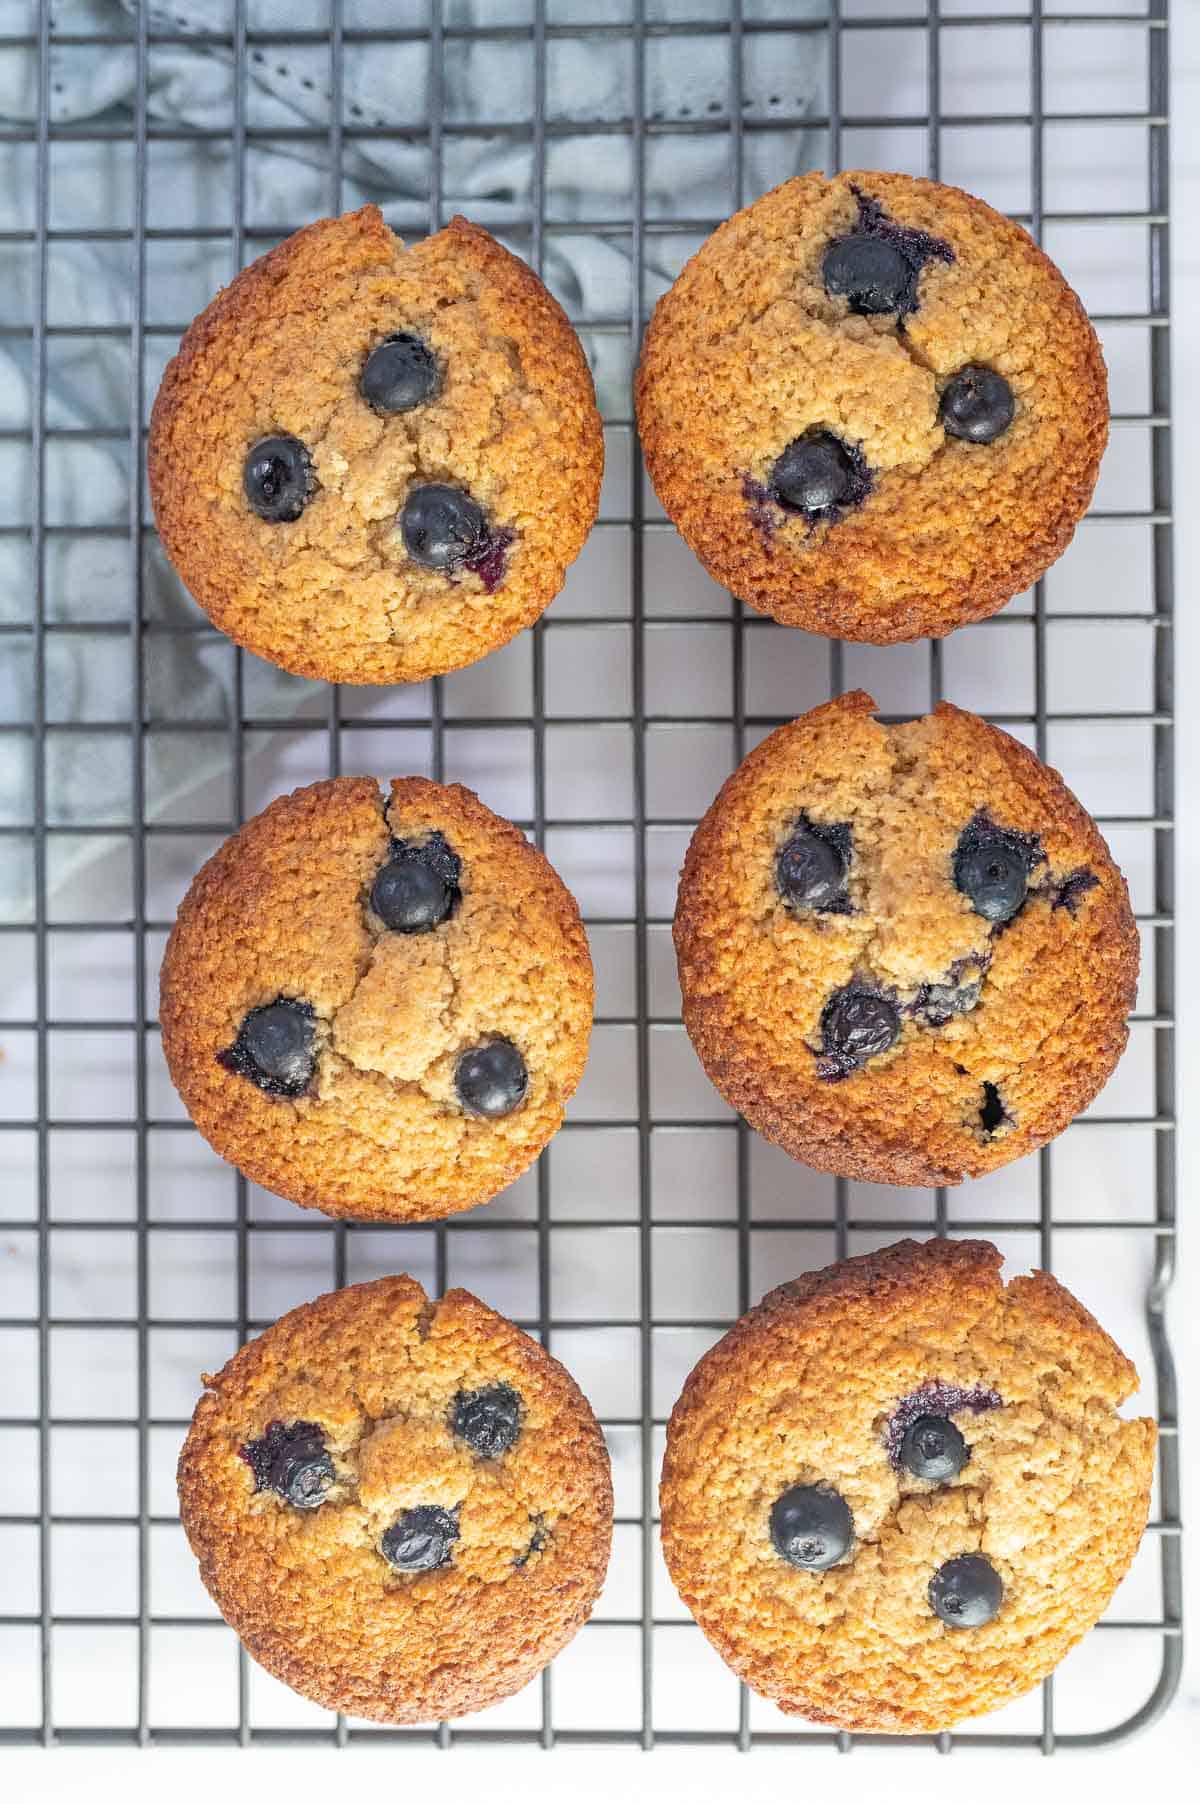 6 blueberry muffins on a wire rack